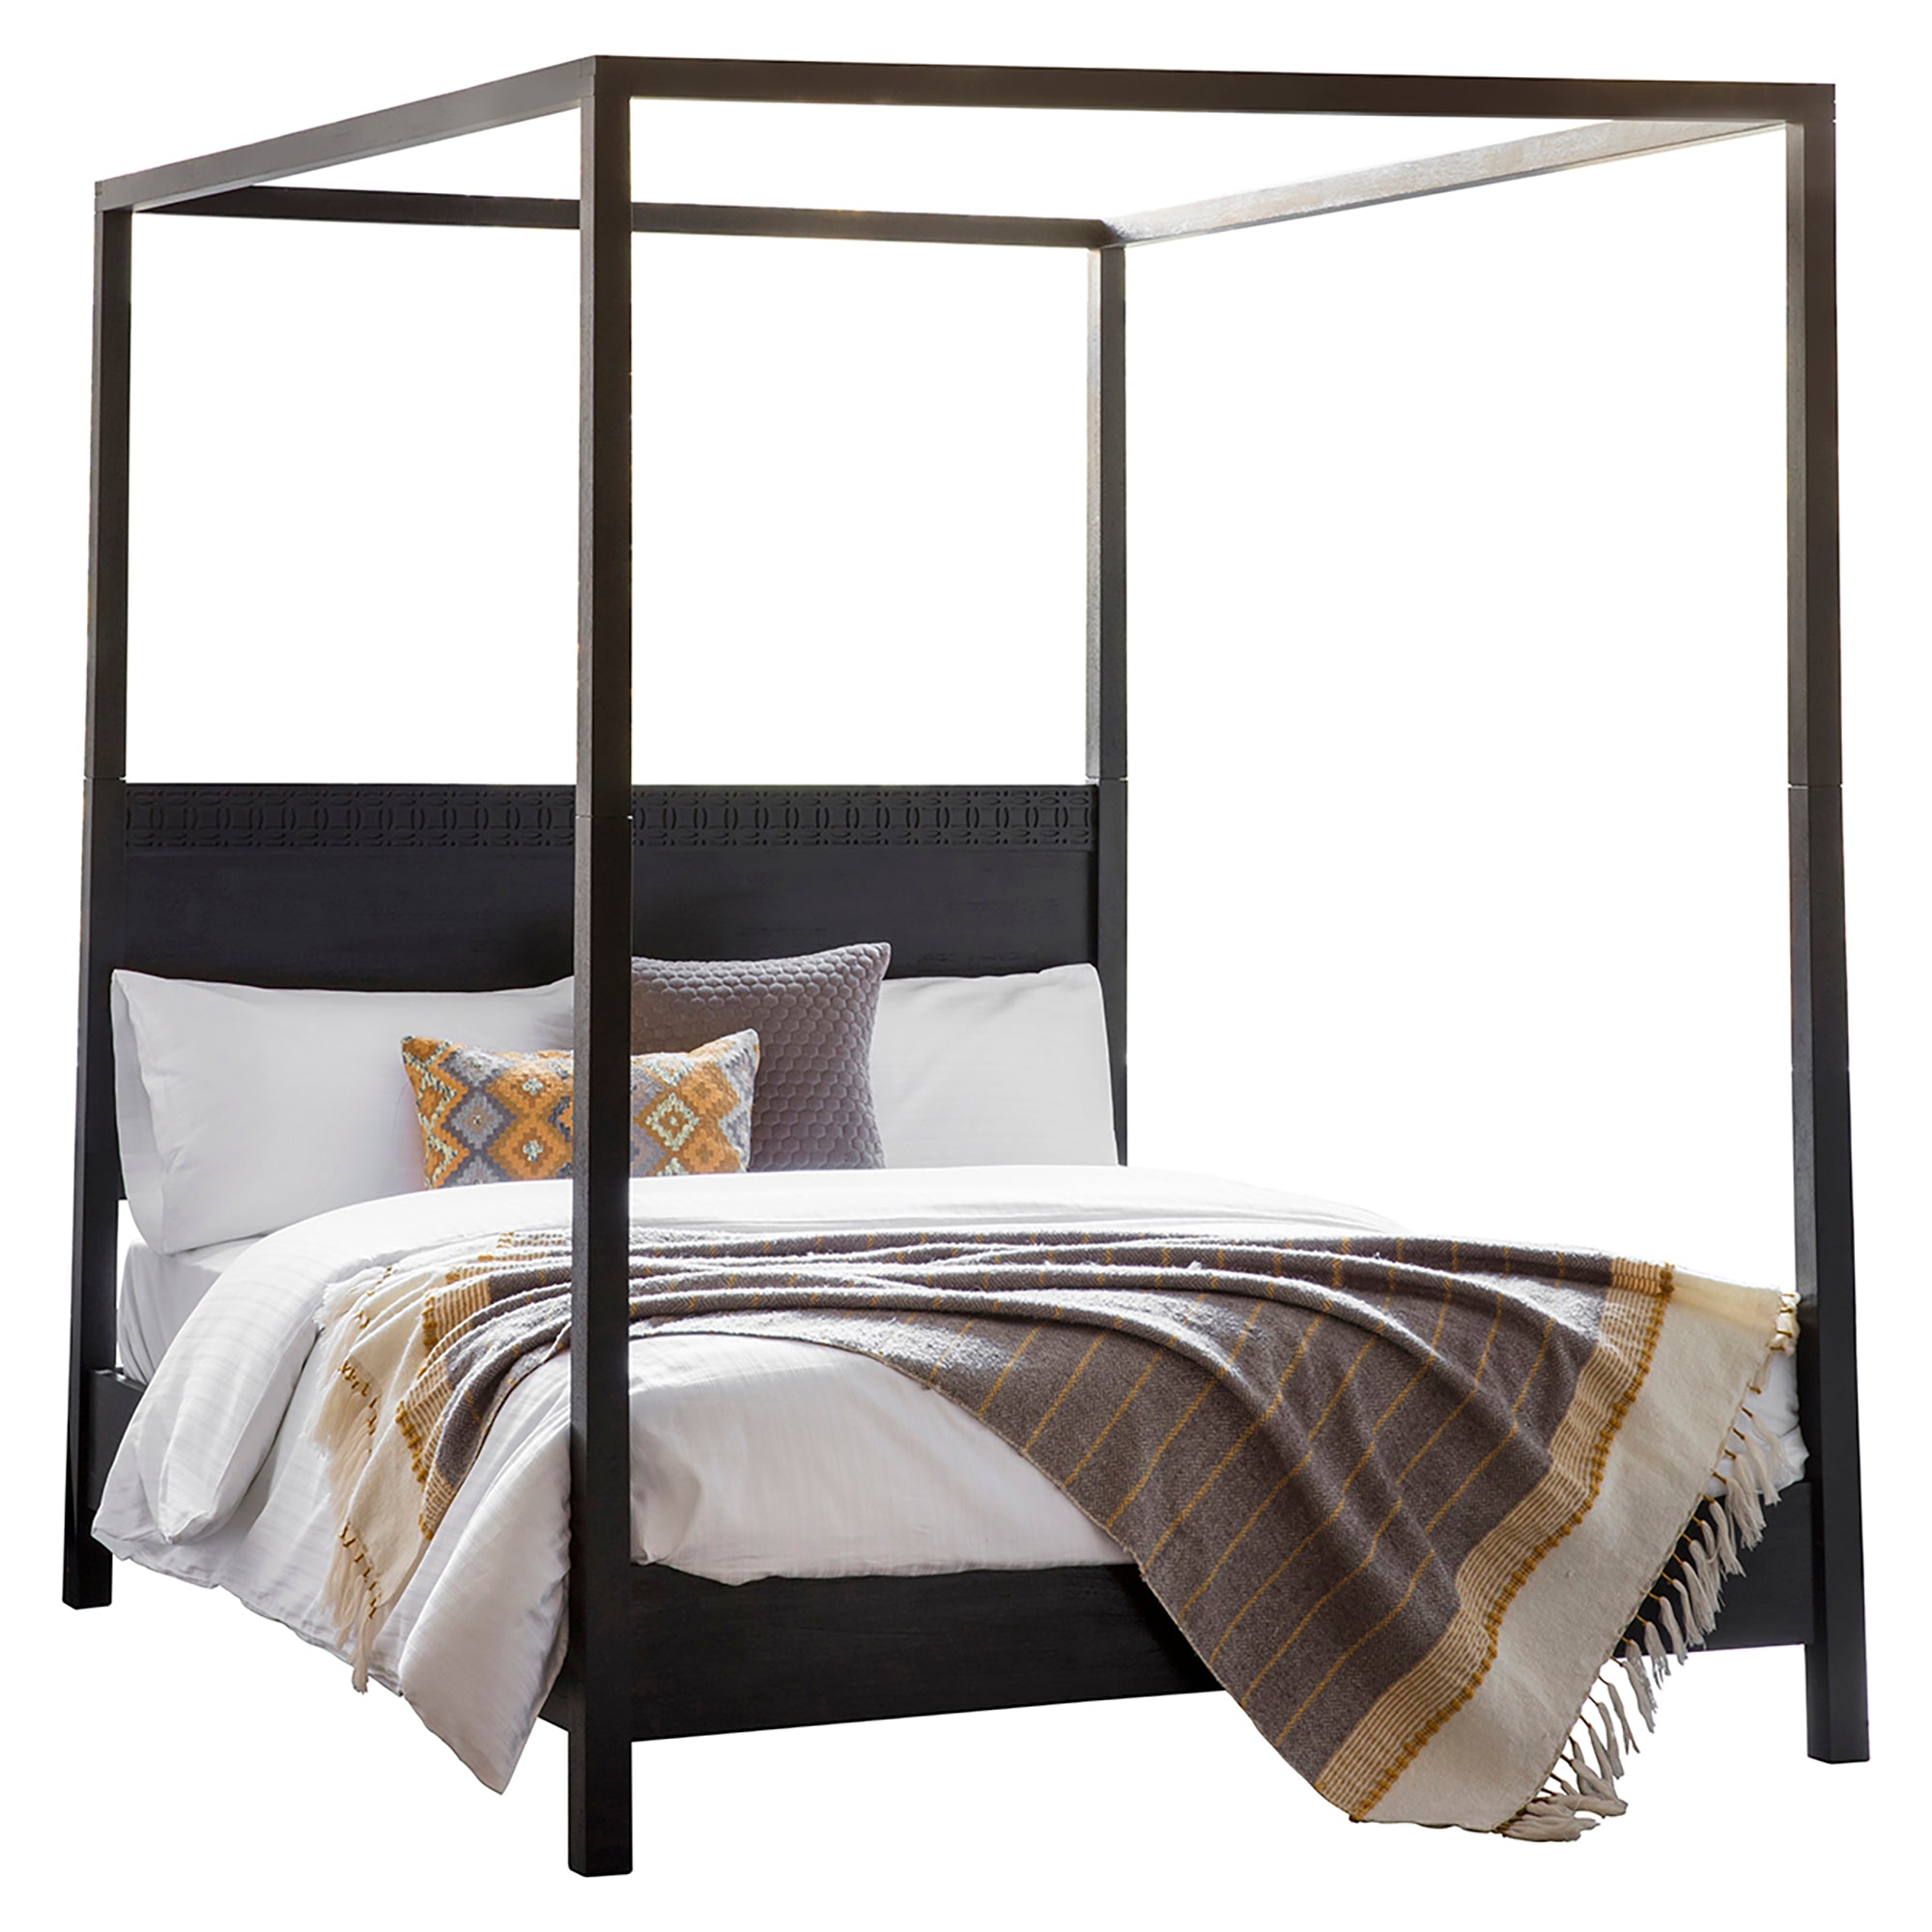 The Beautiful 4 Poster Bed